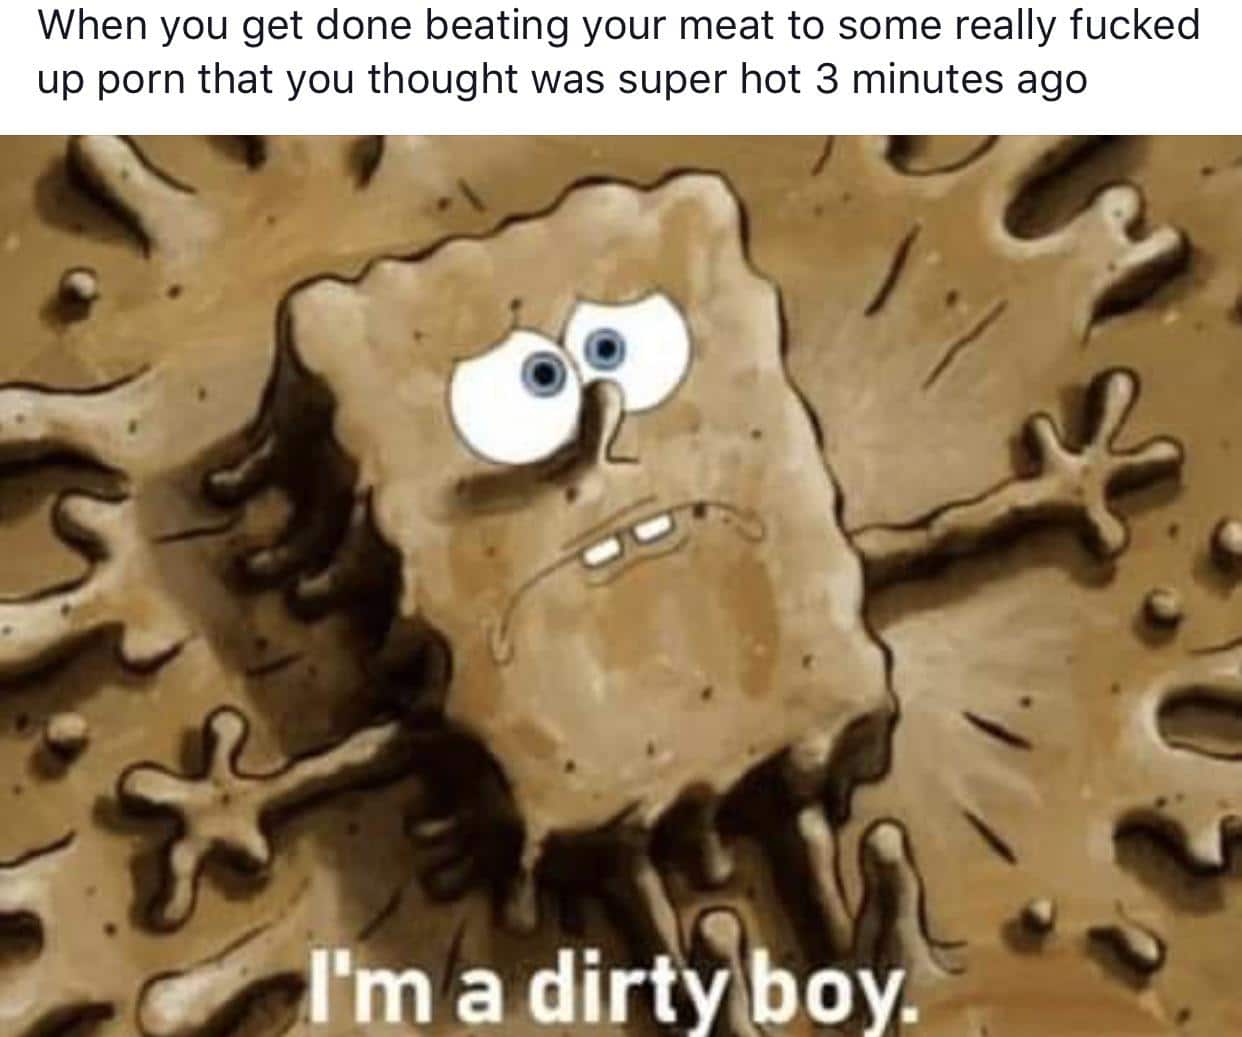 spongebob spongebob-memes spongebob text: When you get done beating your meat to some really fucked up porn that you thought was super hot 3 minutes ago 'QA-I'm a dirtytboy. 